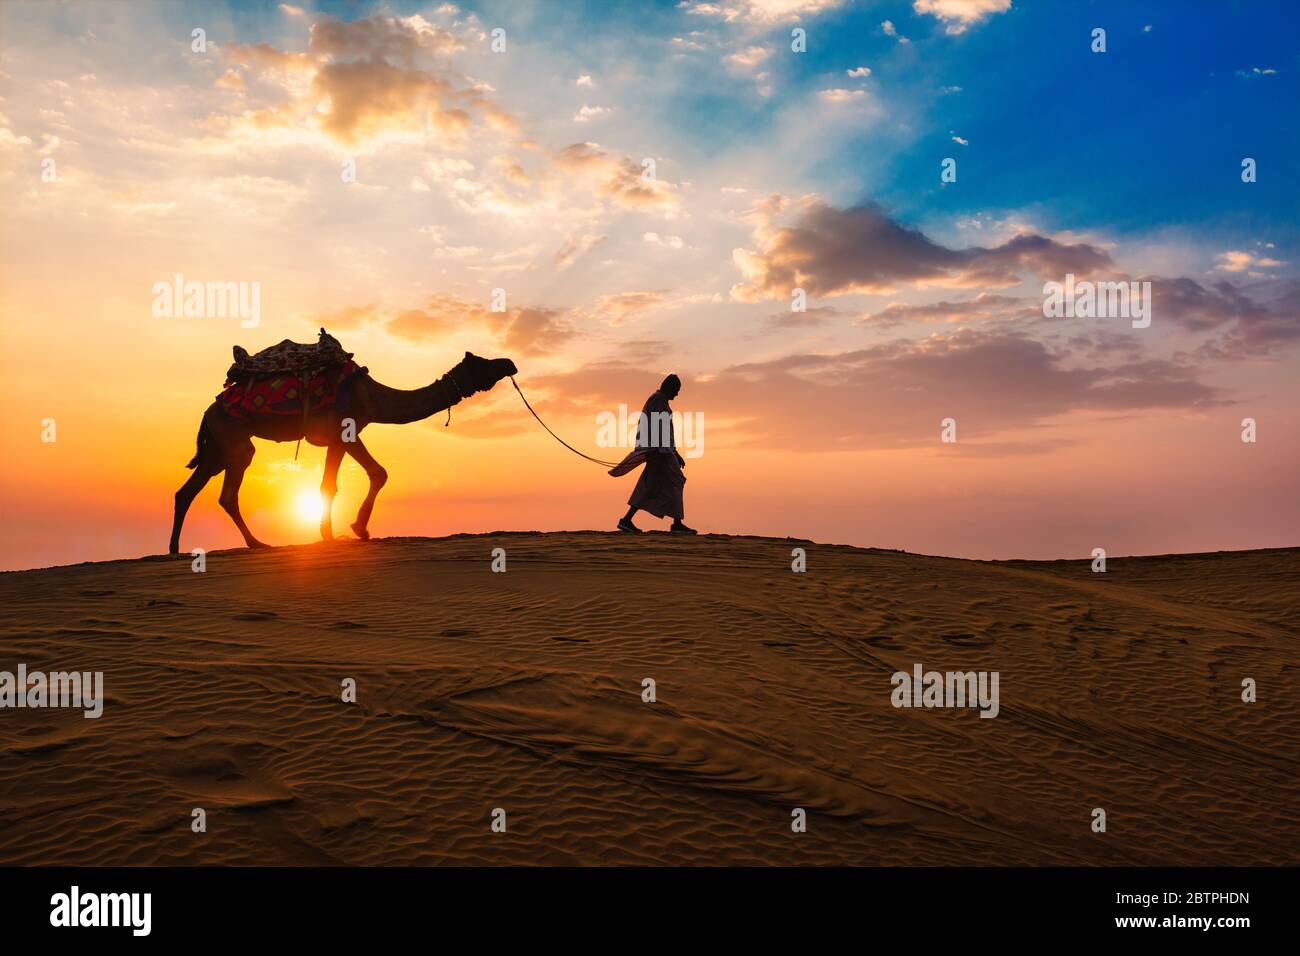 Indian cameleer camel driver with camel silhouettes in dunes on sunset. Jaisalmer, Rajasthan, India Stock Photo